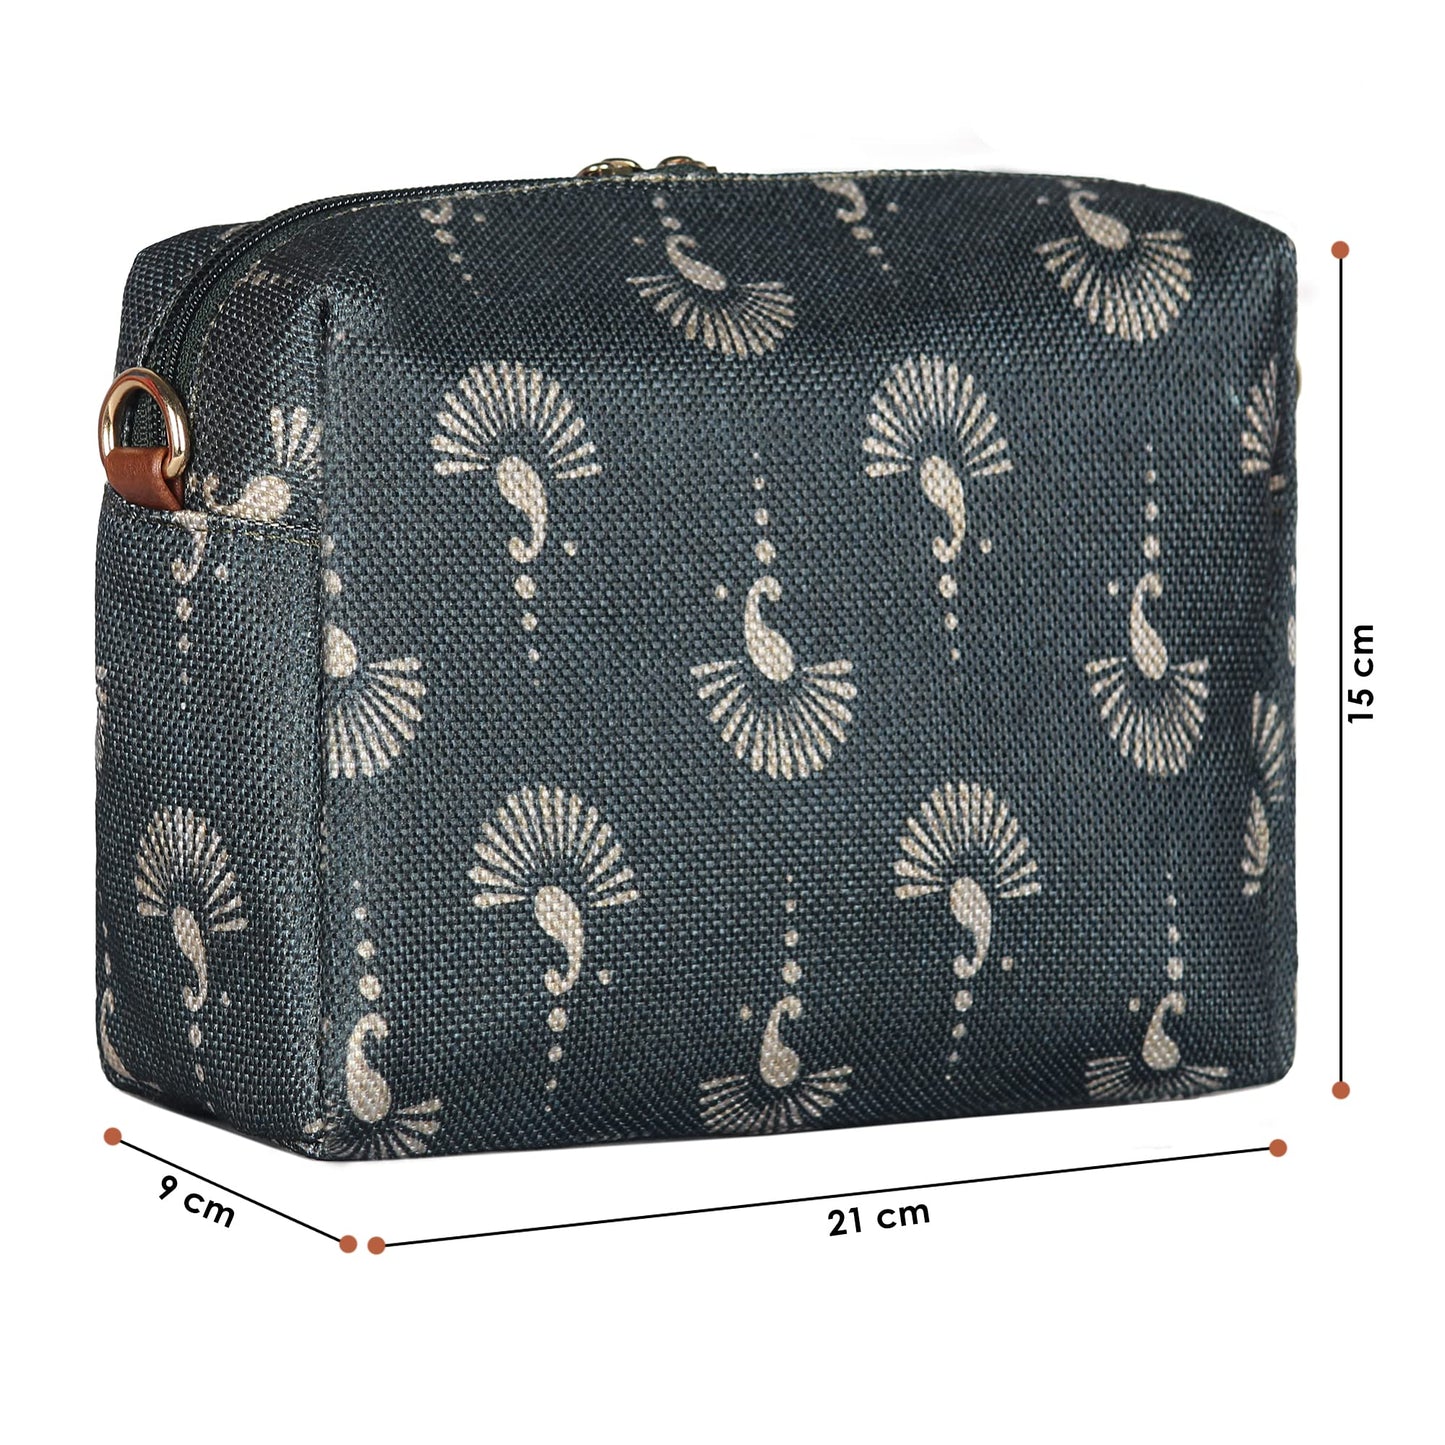 THE CLOWNFISH Isla Printed Handicraft Fabric Crossbody Sling bag for Women Casual Party Bag Purse with Adjustable Shoulder Strap and Printed Design for Ladies College Girls (Slate Grey)